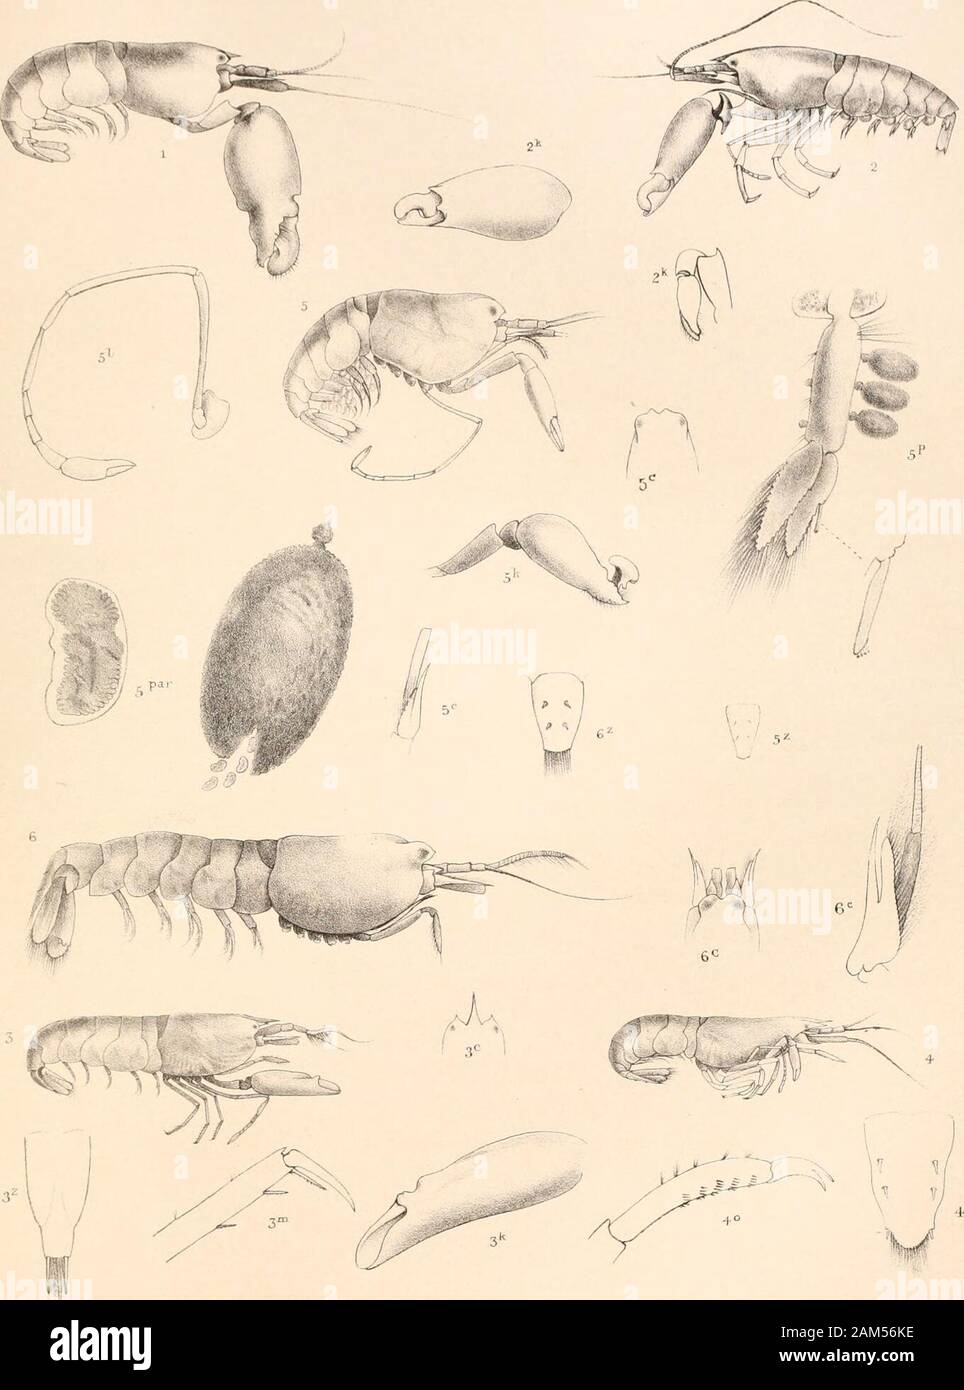 Report on the scientific results of the voyage of H.M.SChallenger during the years 1873-76 : under the command of Captain George SNares, R.N., F.R.Sand Captain Frank Turle Thomson, R.N. . First pereiopod ; larger chela, left. „ 2k. First pereiopod ; smaller chela, right. Alpheus gracilipes (p. 561). :;. Lateral view ; enlarged three times. , 3c. Cephalon, frontal region. , 3/ First pereiopod ; larger chela. , 3m. Third pereiopod ; terminal joints. , 3z. Telson. Alpheus biunguiculatus (p. 562). , 4. Lateral view ; enlarged three times., 4o. Fifth pereiopod ; terminal joints., 4z. Telson. Betam Stock Photo